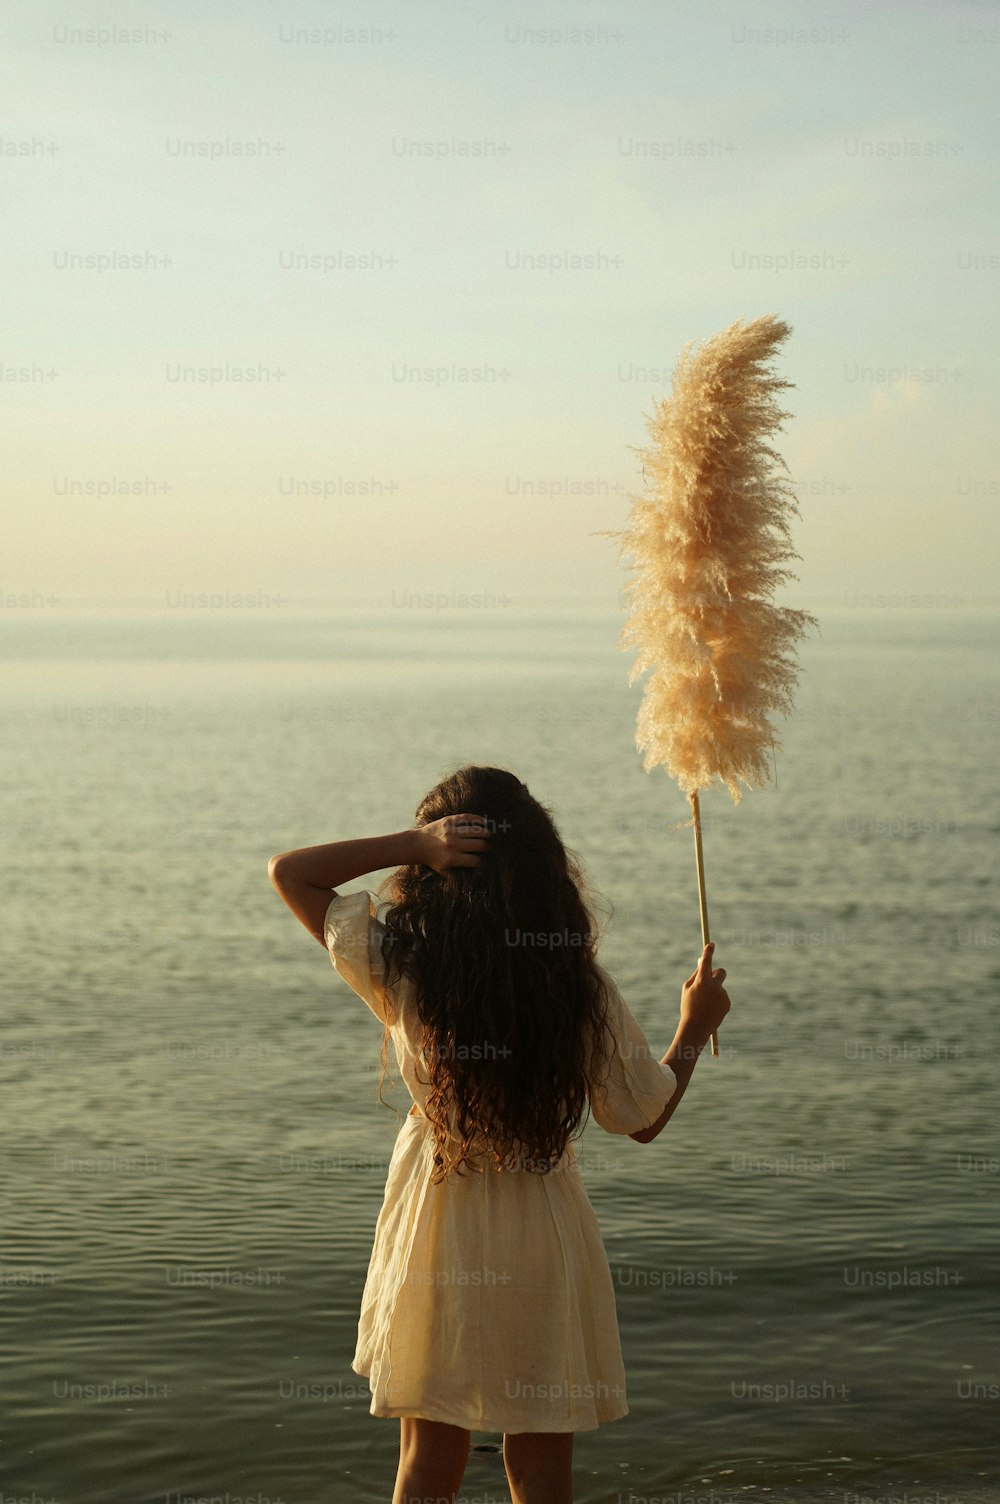 a woman standing on a beach holding a feather wand